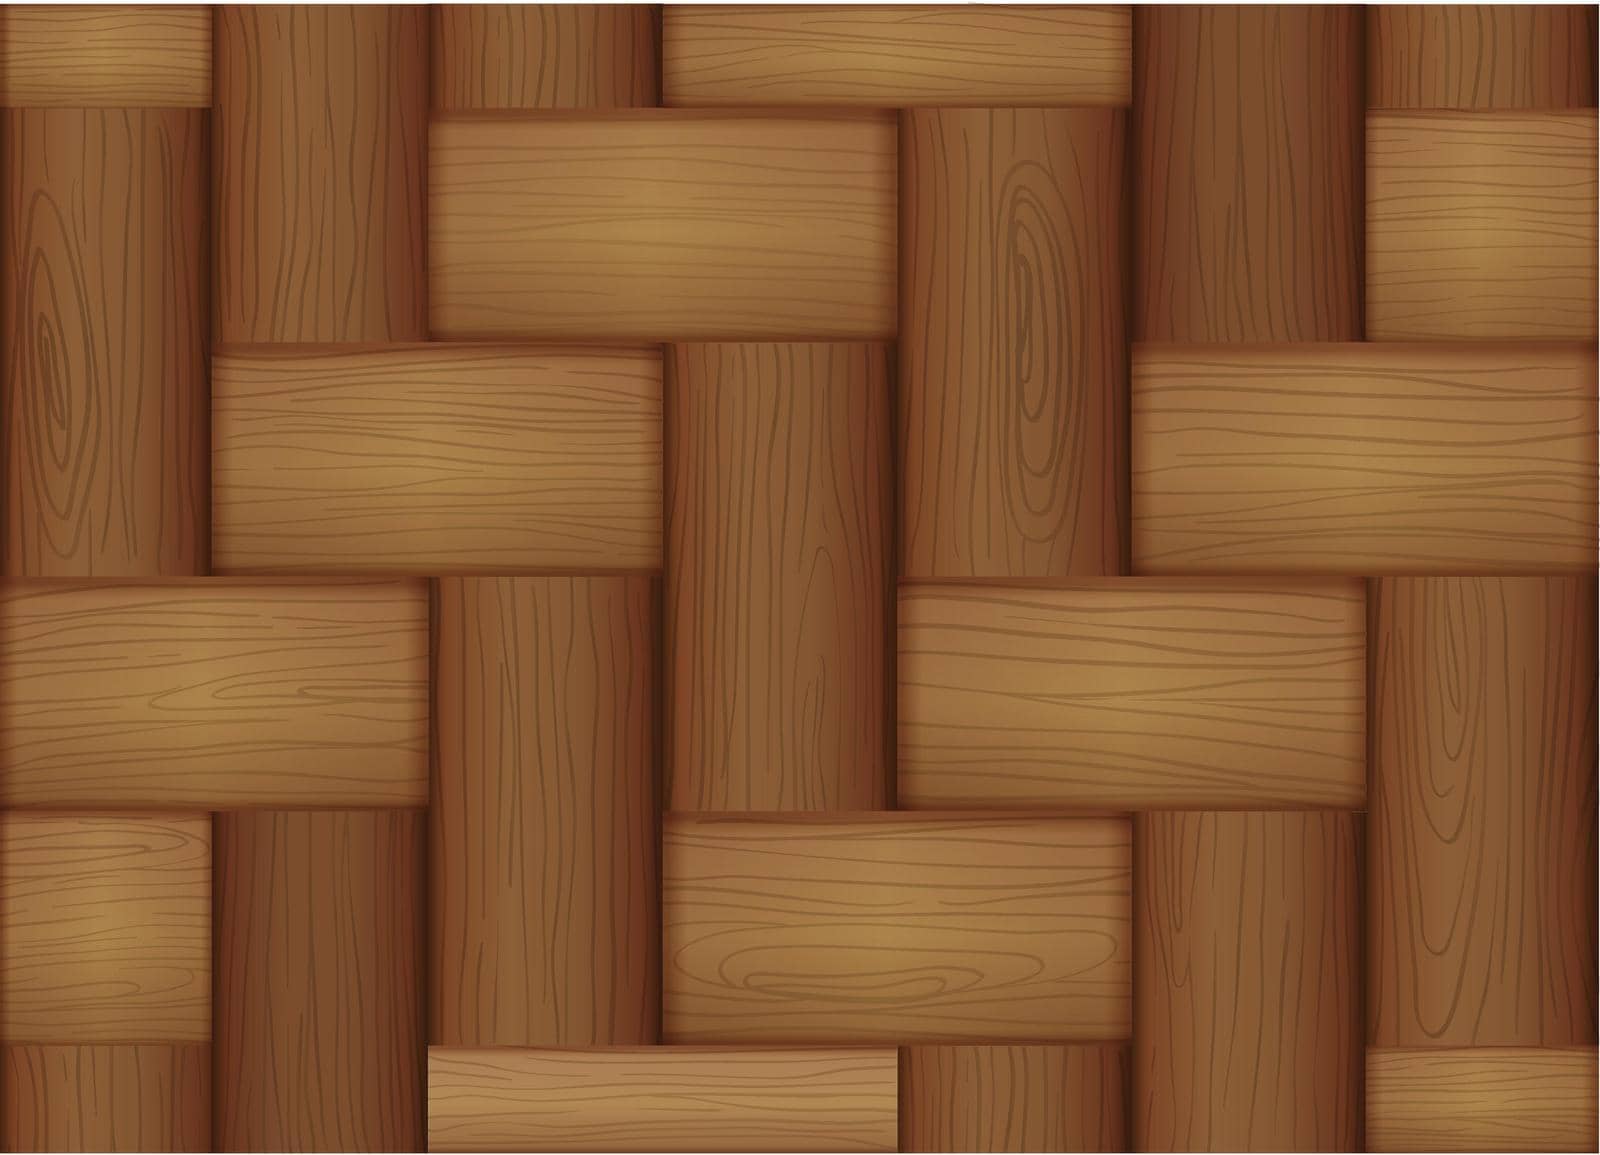 A topview of a wooden tile by iimages